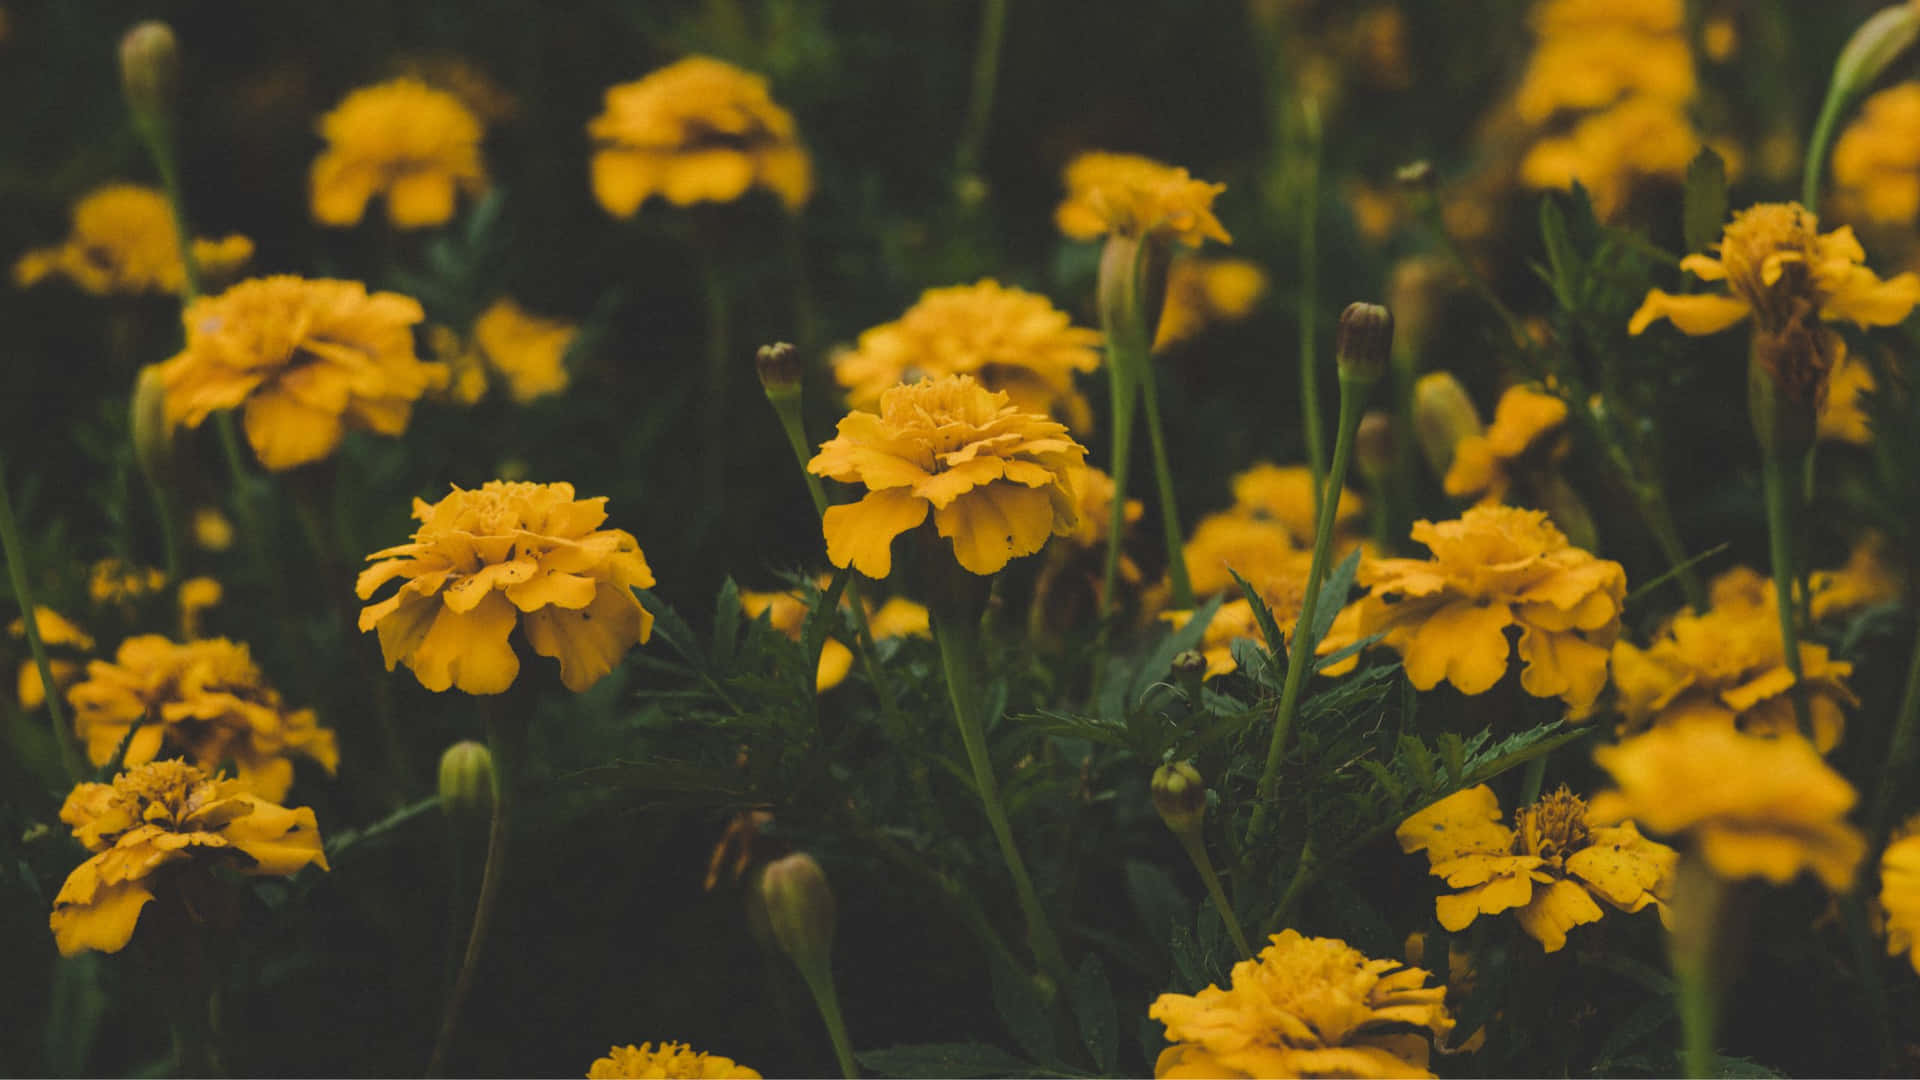 "Glorious yellow flowers illuminating a desktop with aesthetic charm" Wallpaper